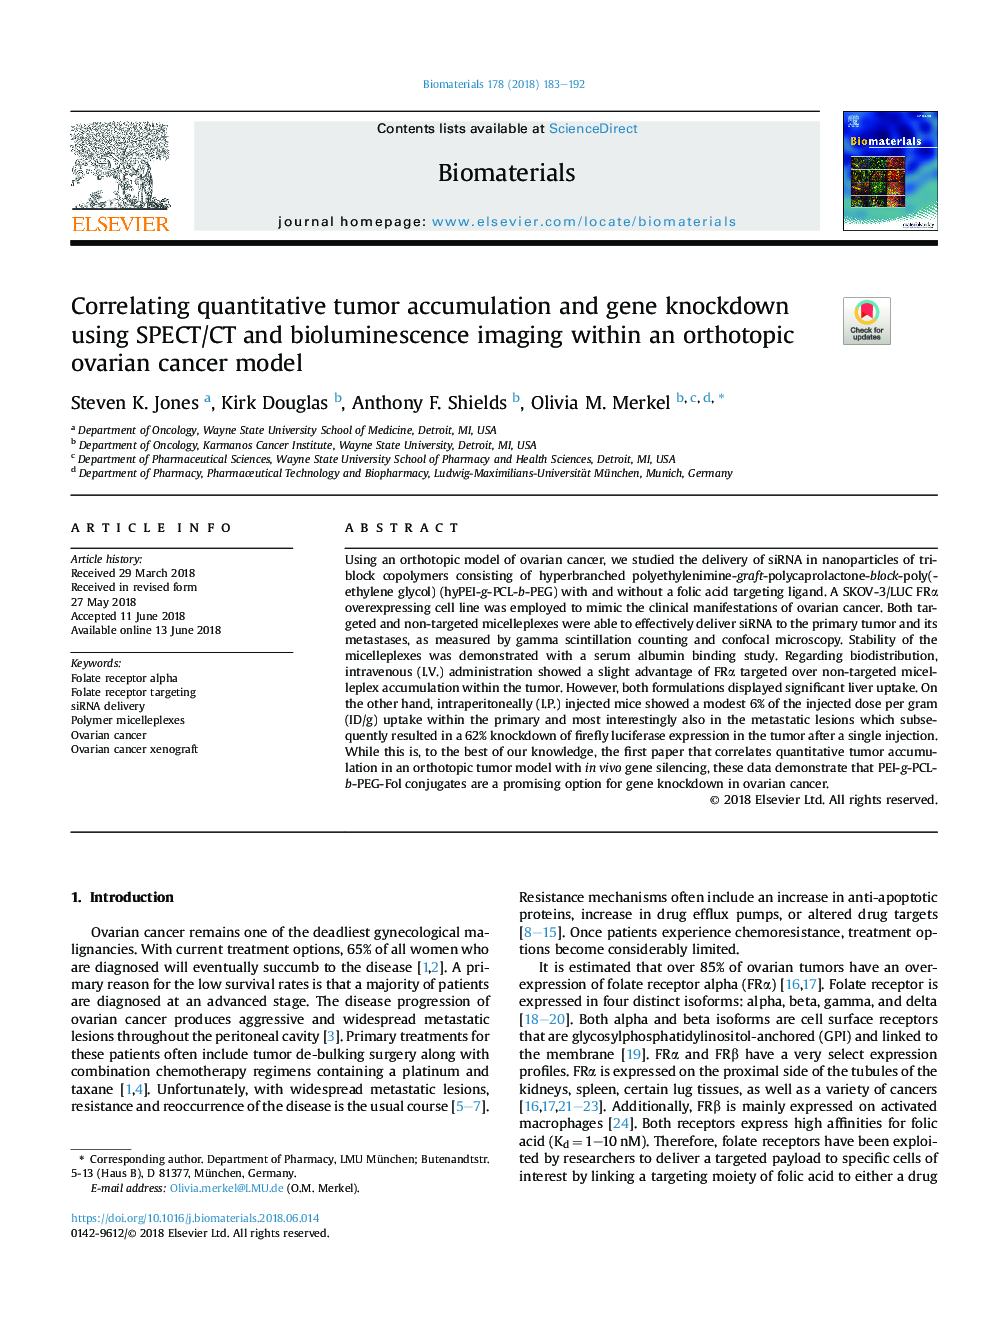 Correlating quantitative tumor accumulation and gene knockdown using SPECT/CT and bioluminescence imaging within an orthotopic ovarian cancer model